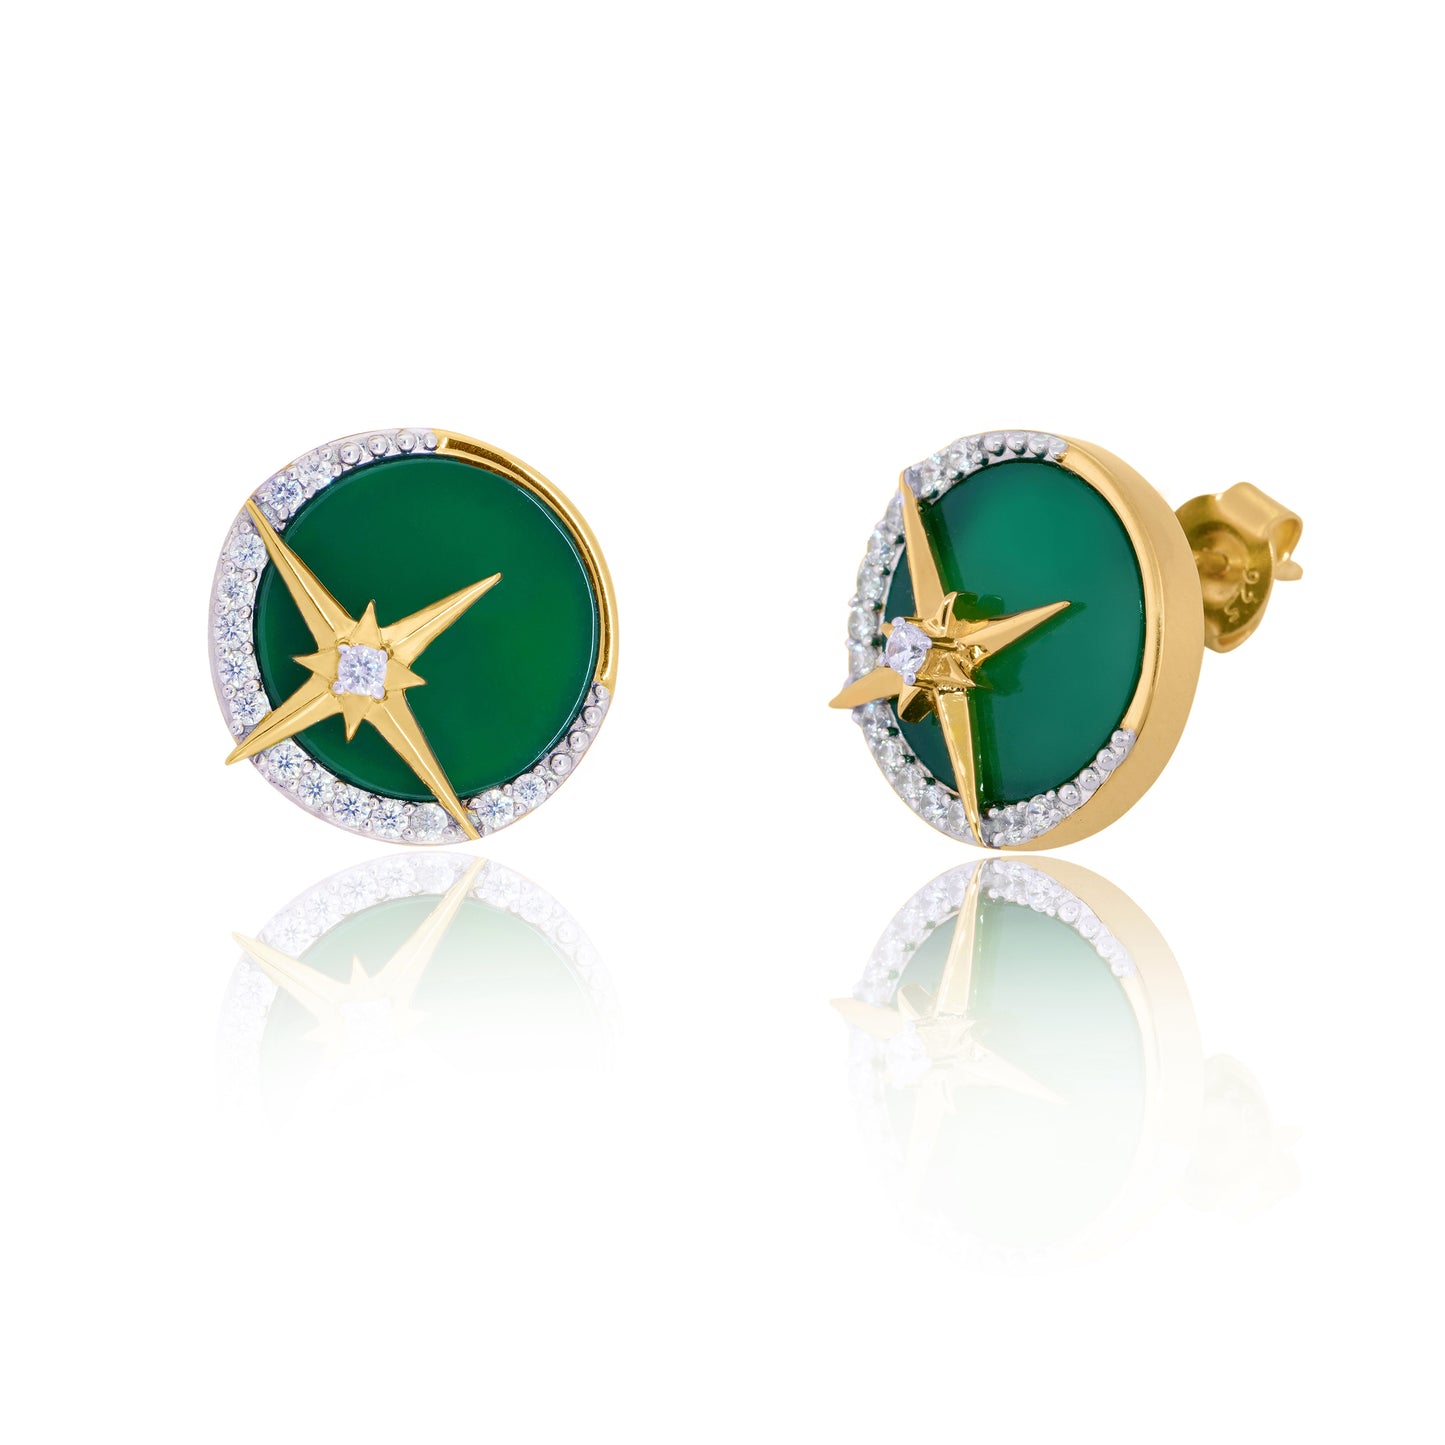 Mystic Green Galaxy: Star Tops Adorned with Green Onyx and Cubic Zirconias